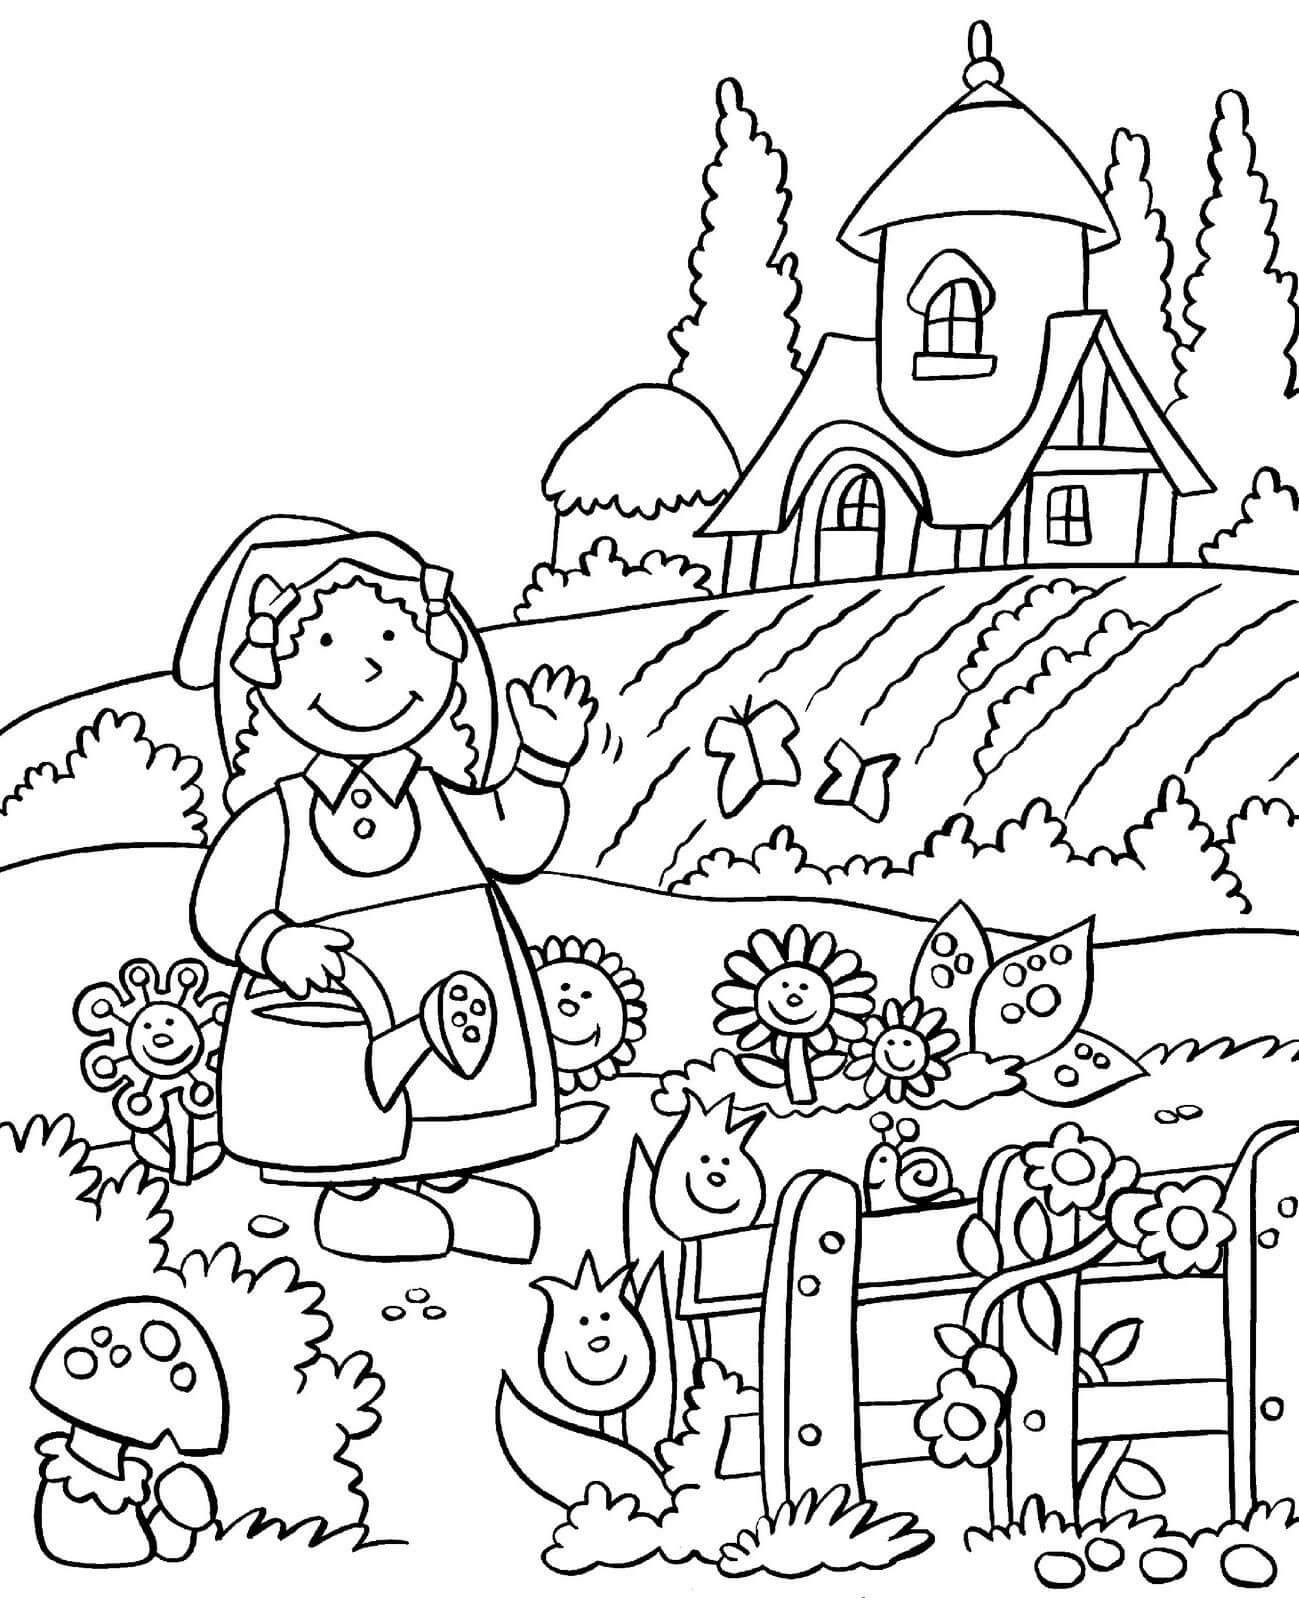 Lady Farmer Coloring Pages